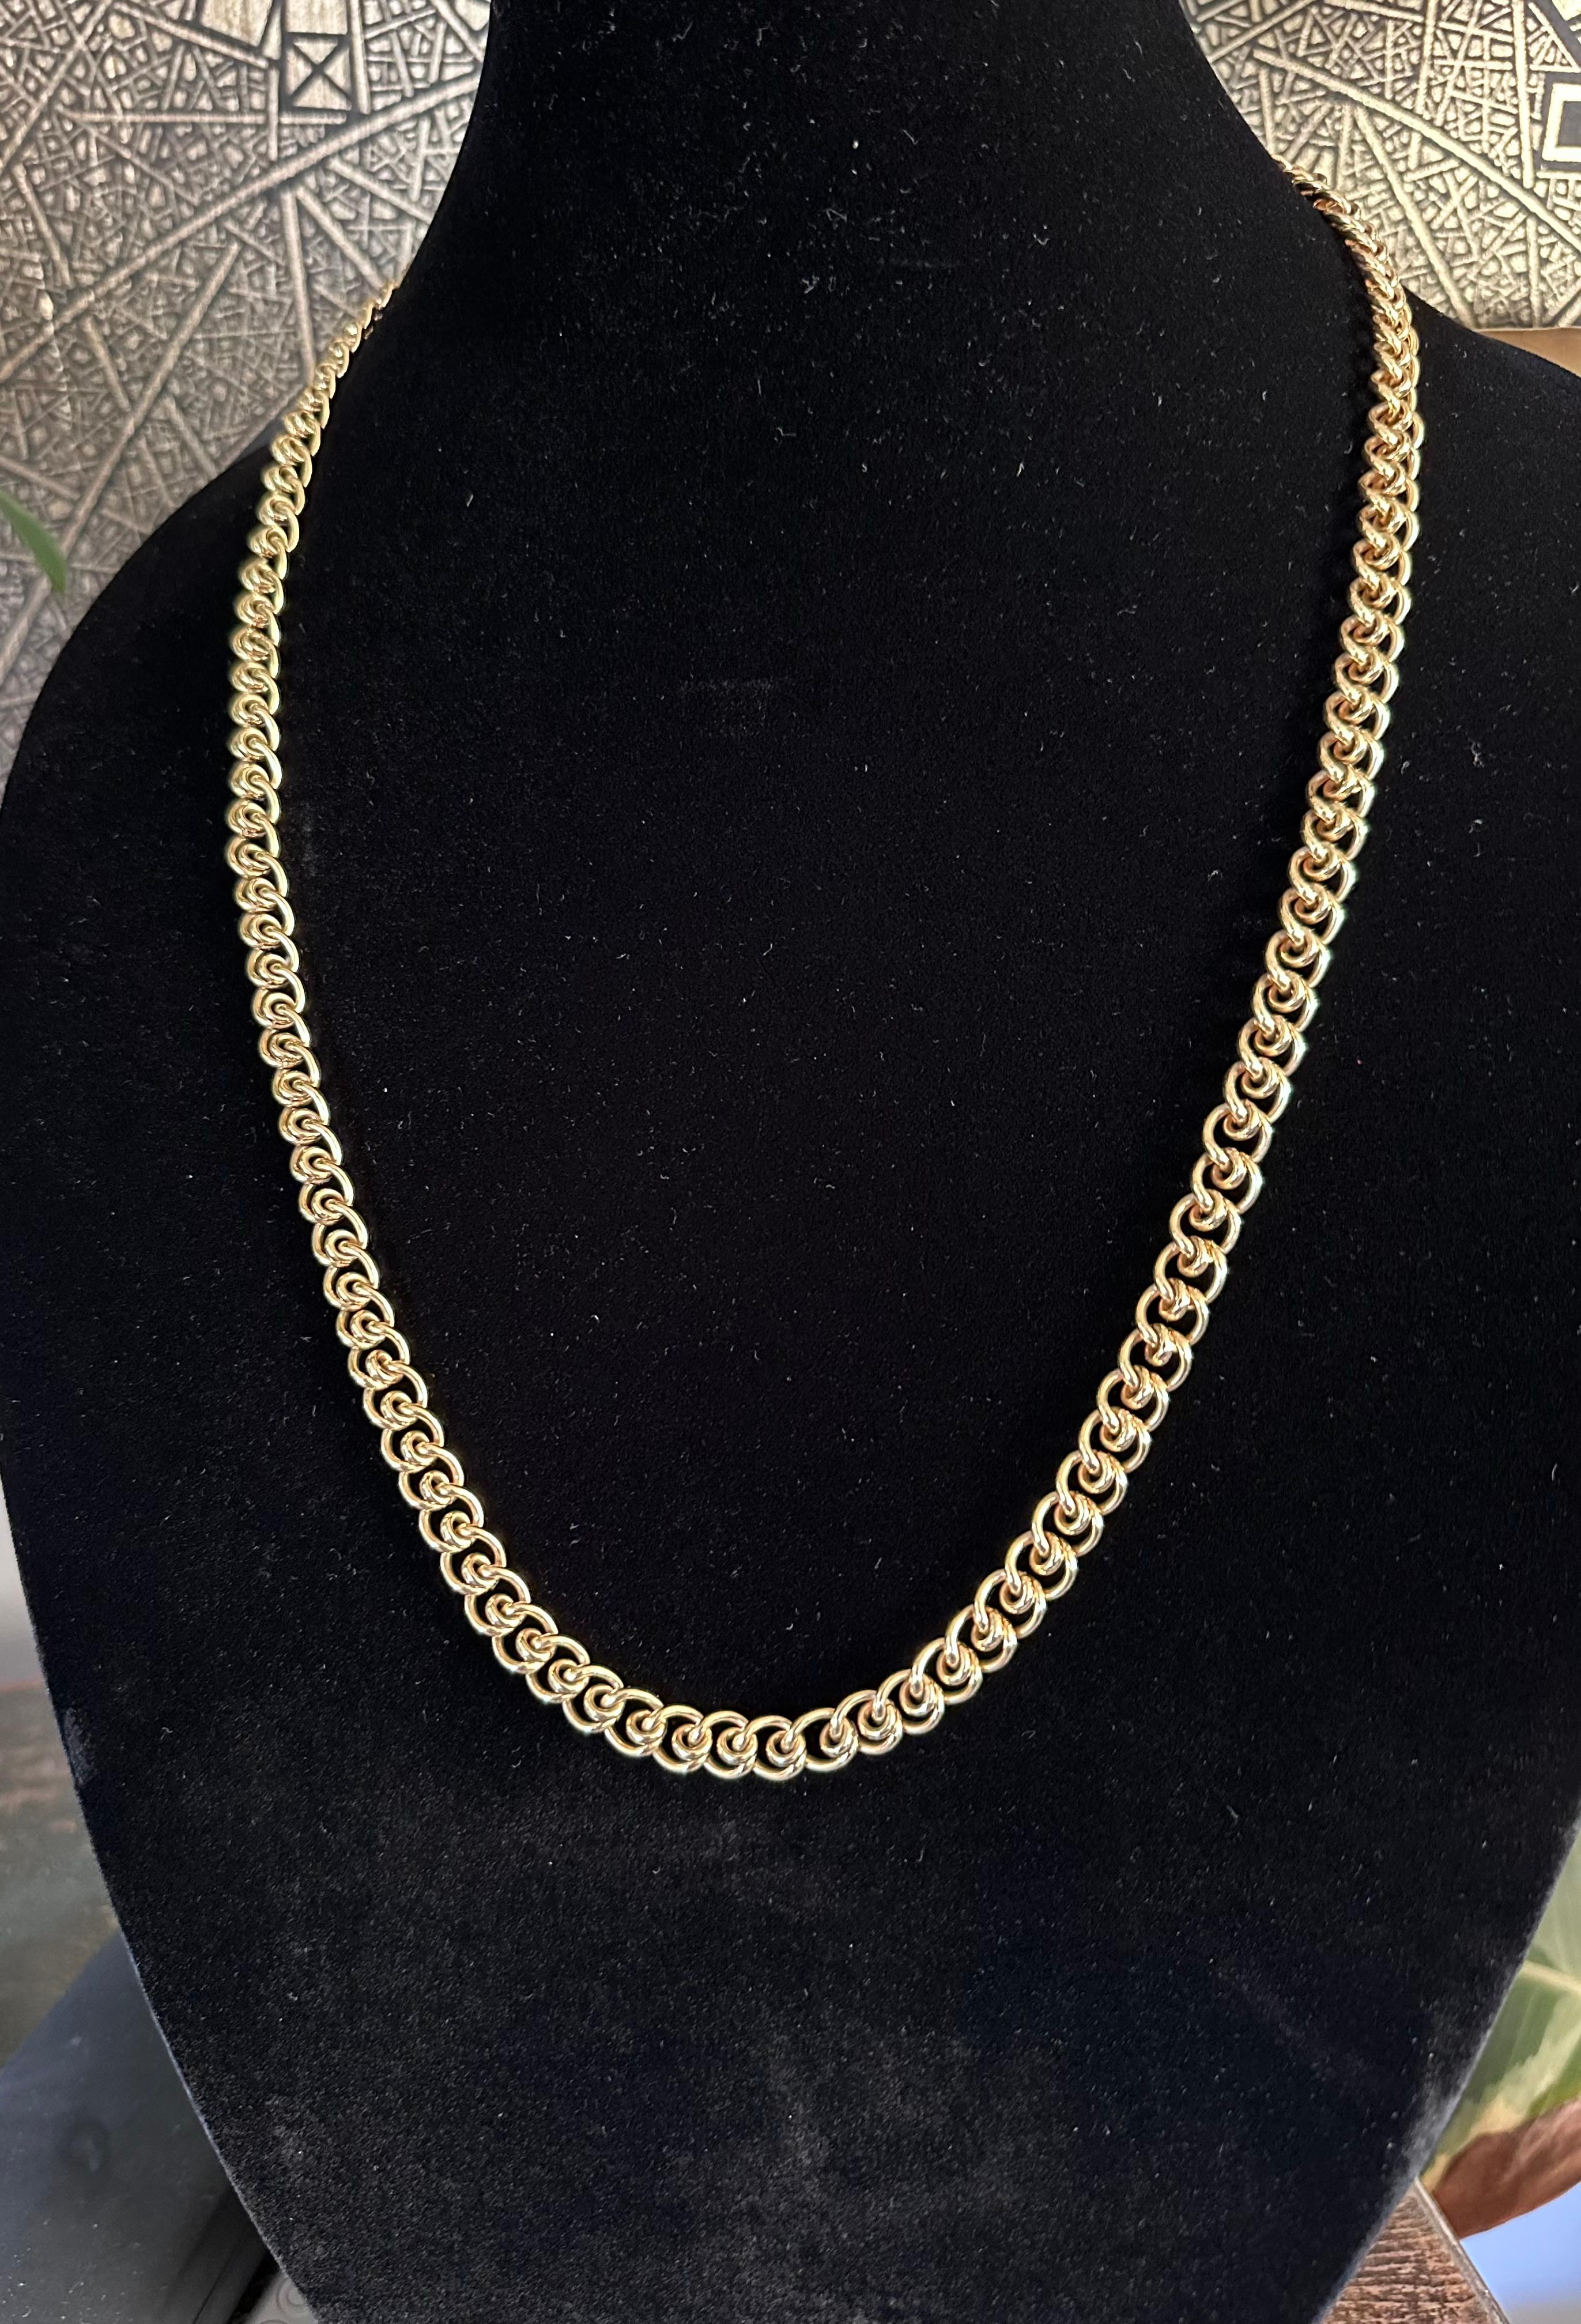 Tiffany & Co  1970's
31 Inch Long Intricate Link Necklace 
18 karat yellow gold necklace.
Weight  3.25 OZ 0r ( 100 g) 
Circa 1970 
Signed Tiffany & Co and Tiffany scratch inventory numbers. 
Nice Long Chain,  Well Cared for,  Excellent Condition and